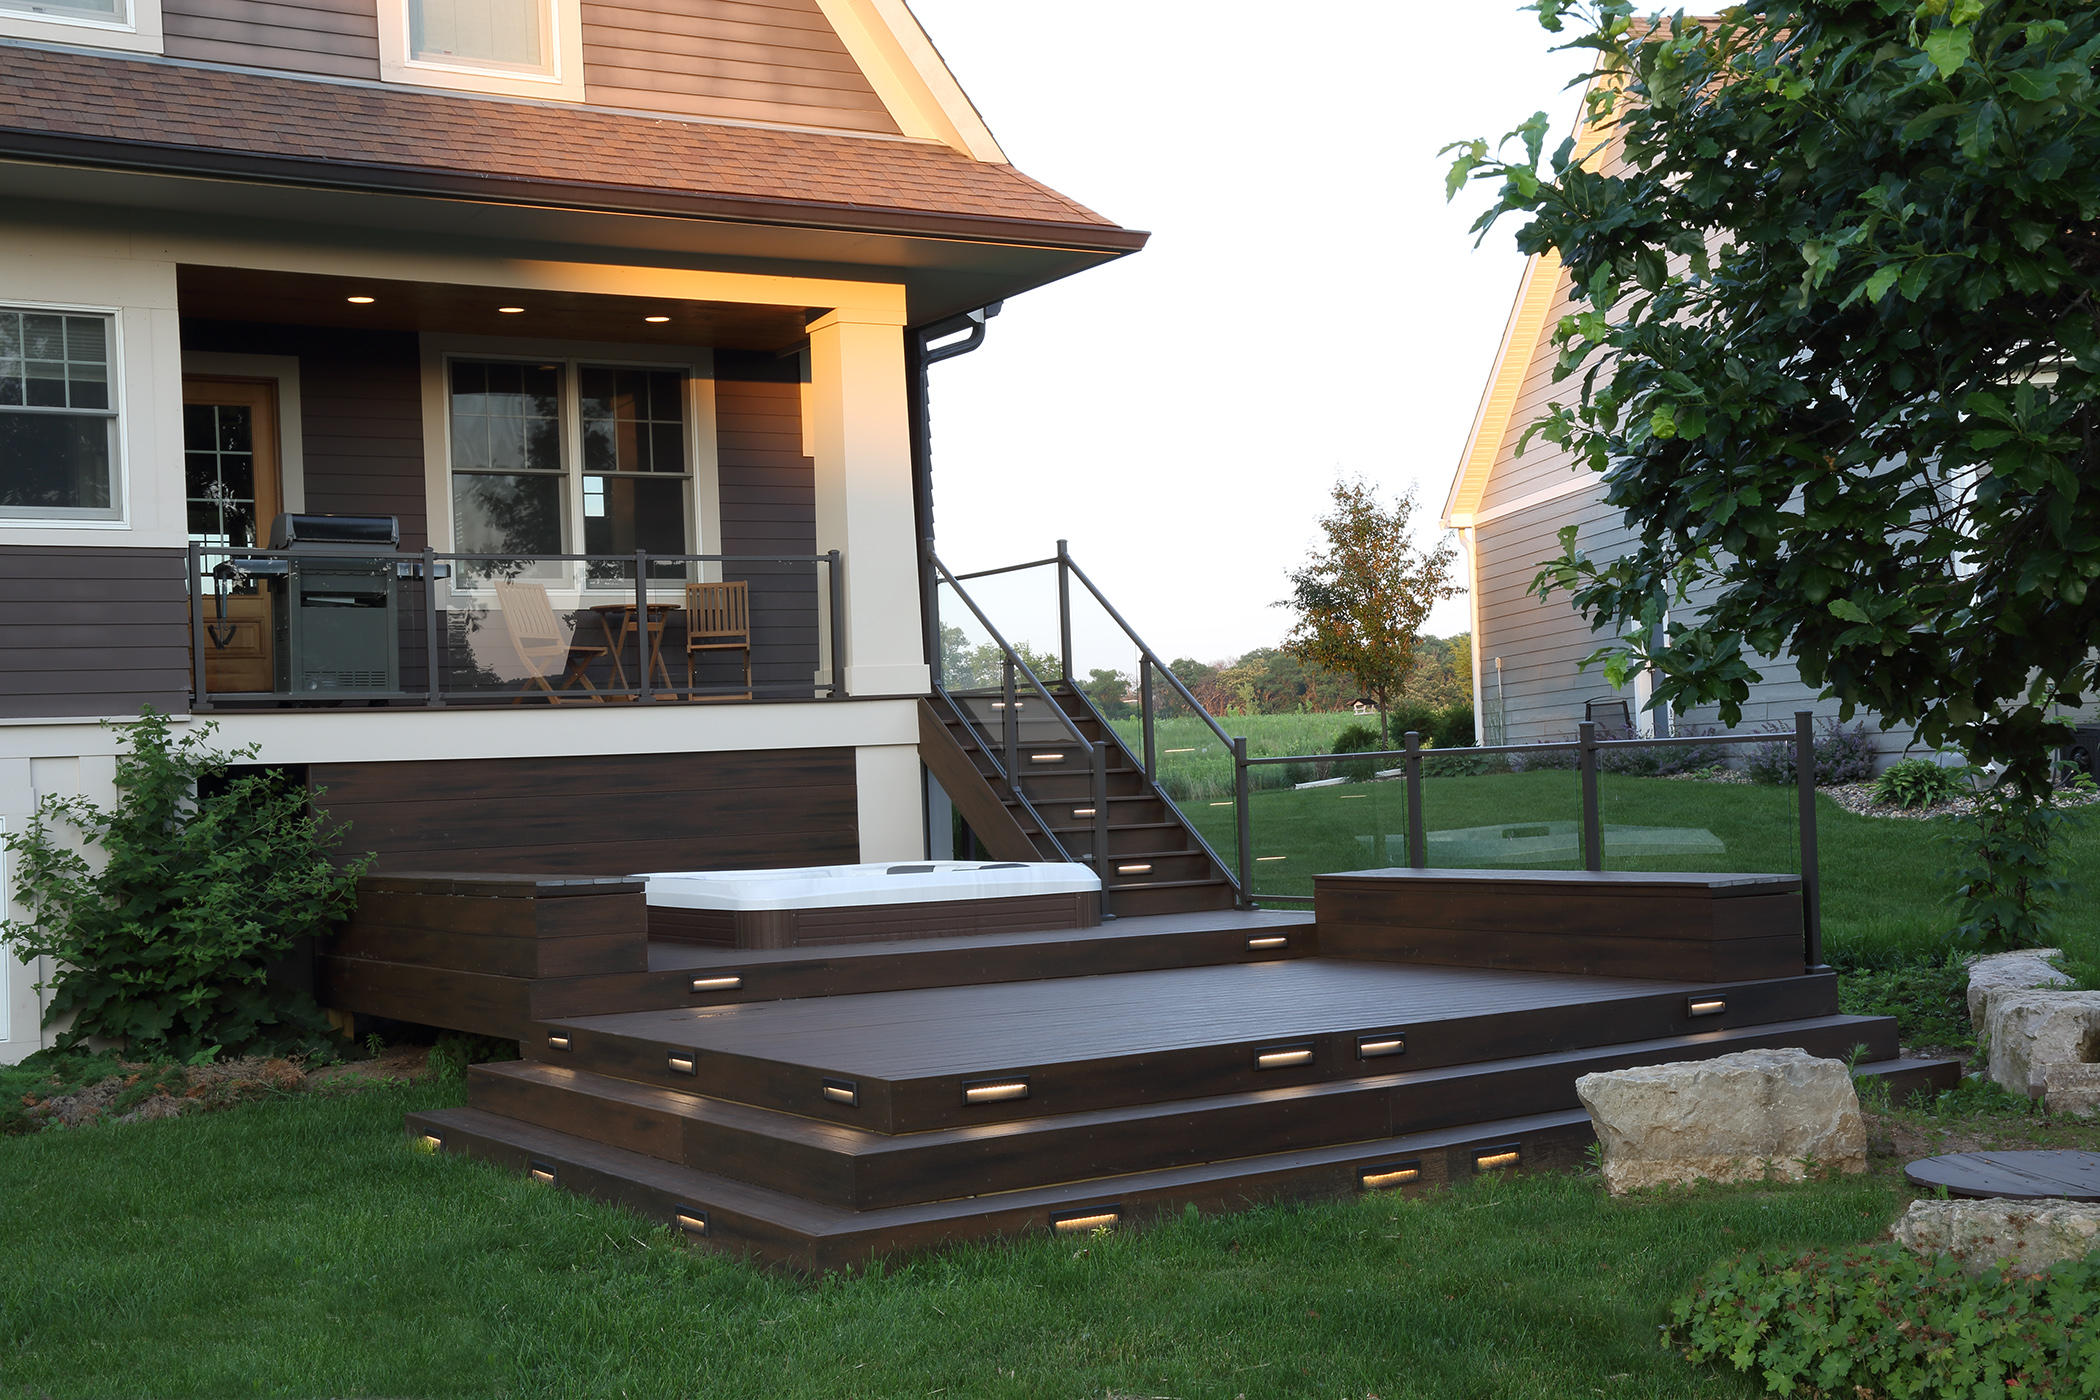 Low Voltage Wiring accents this custom built deck.